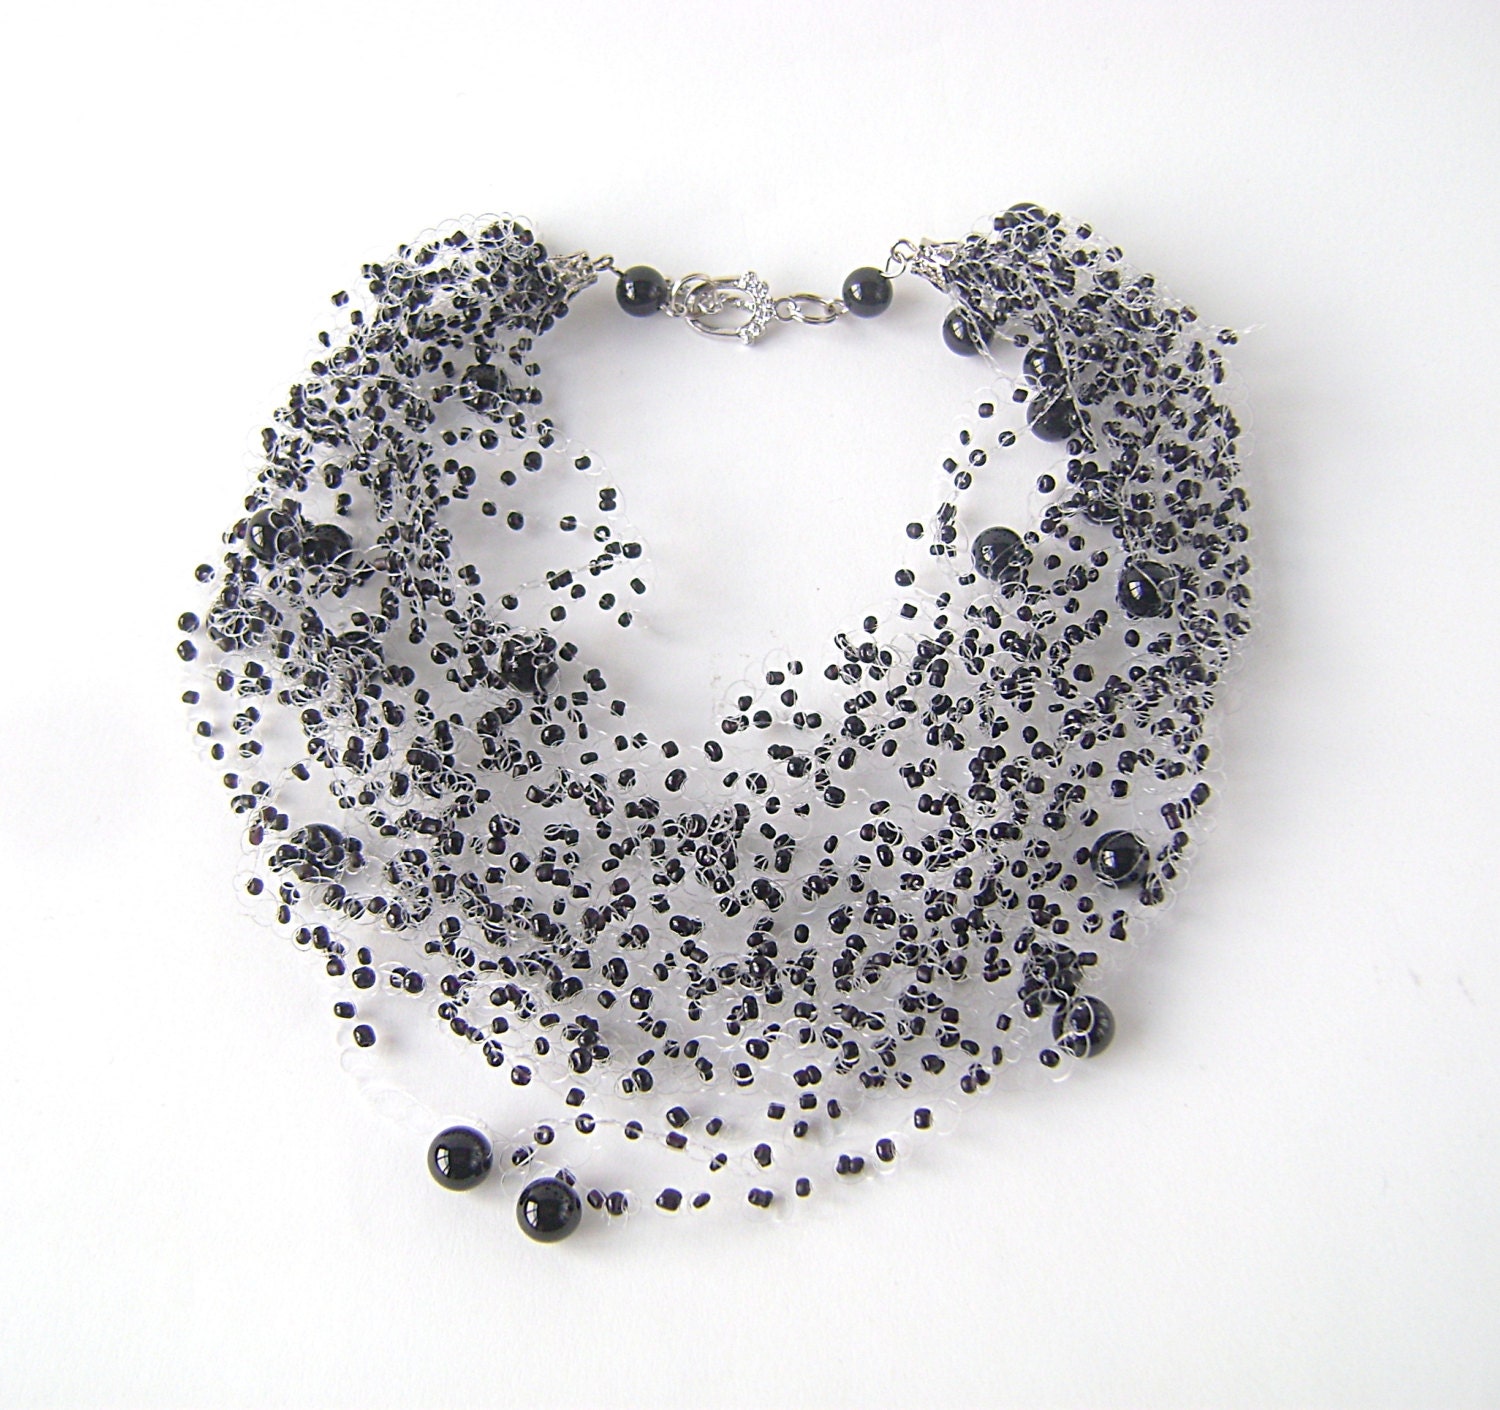 Airy crochet Necklace with seed beads, black agate beads / black modern jewelry - PrettyNatali